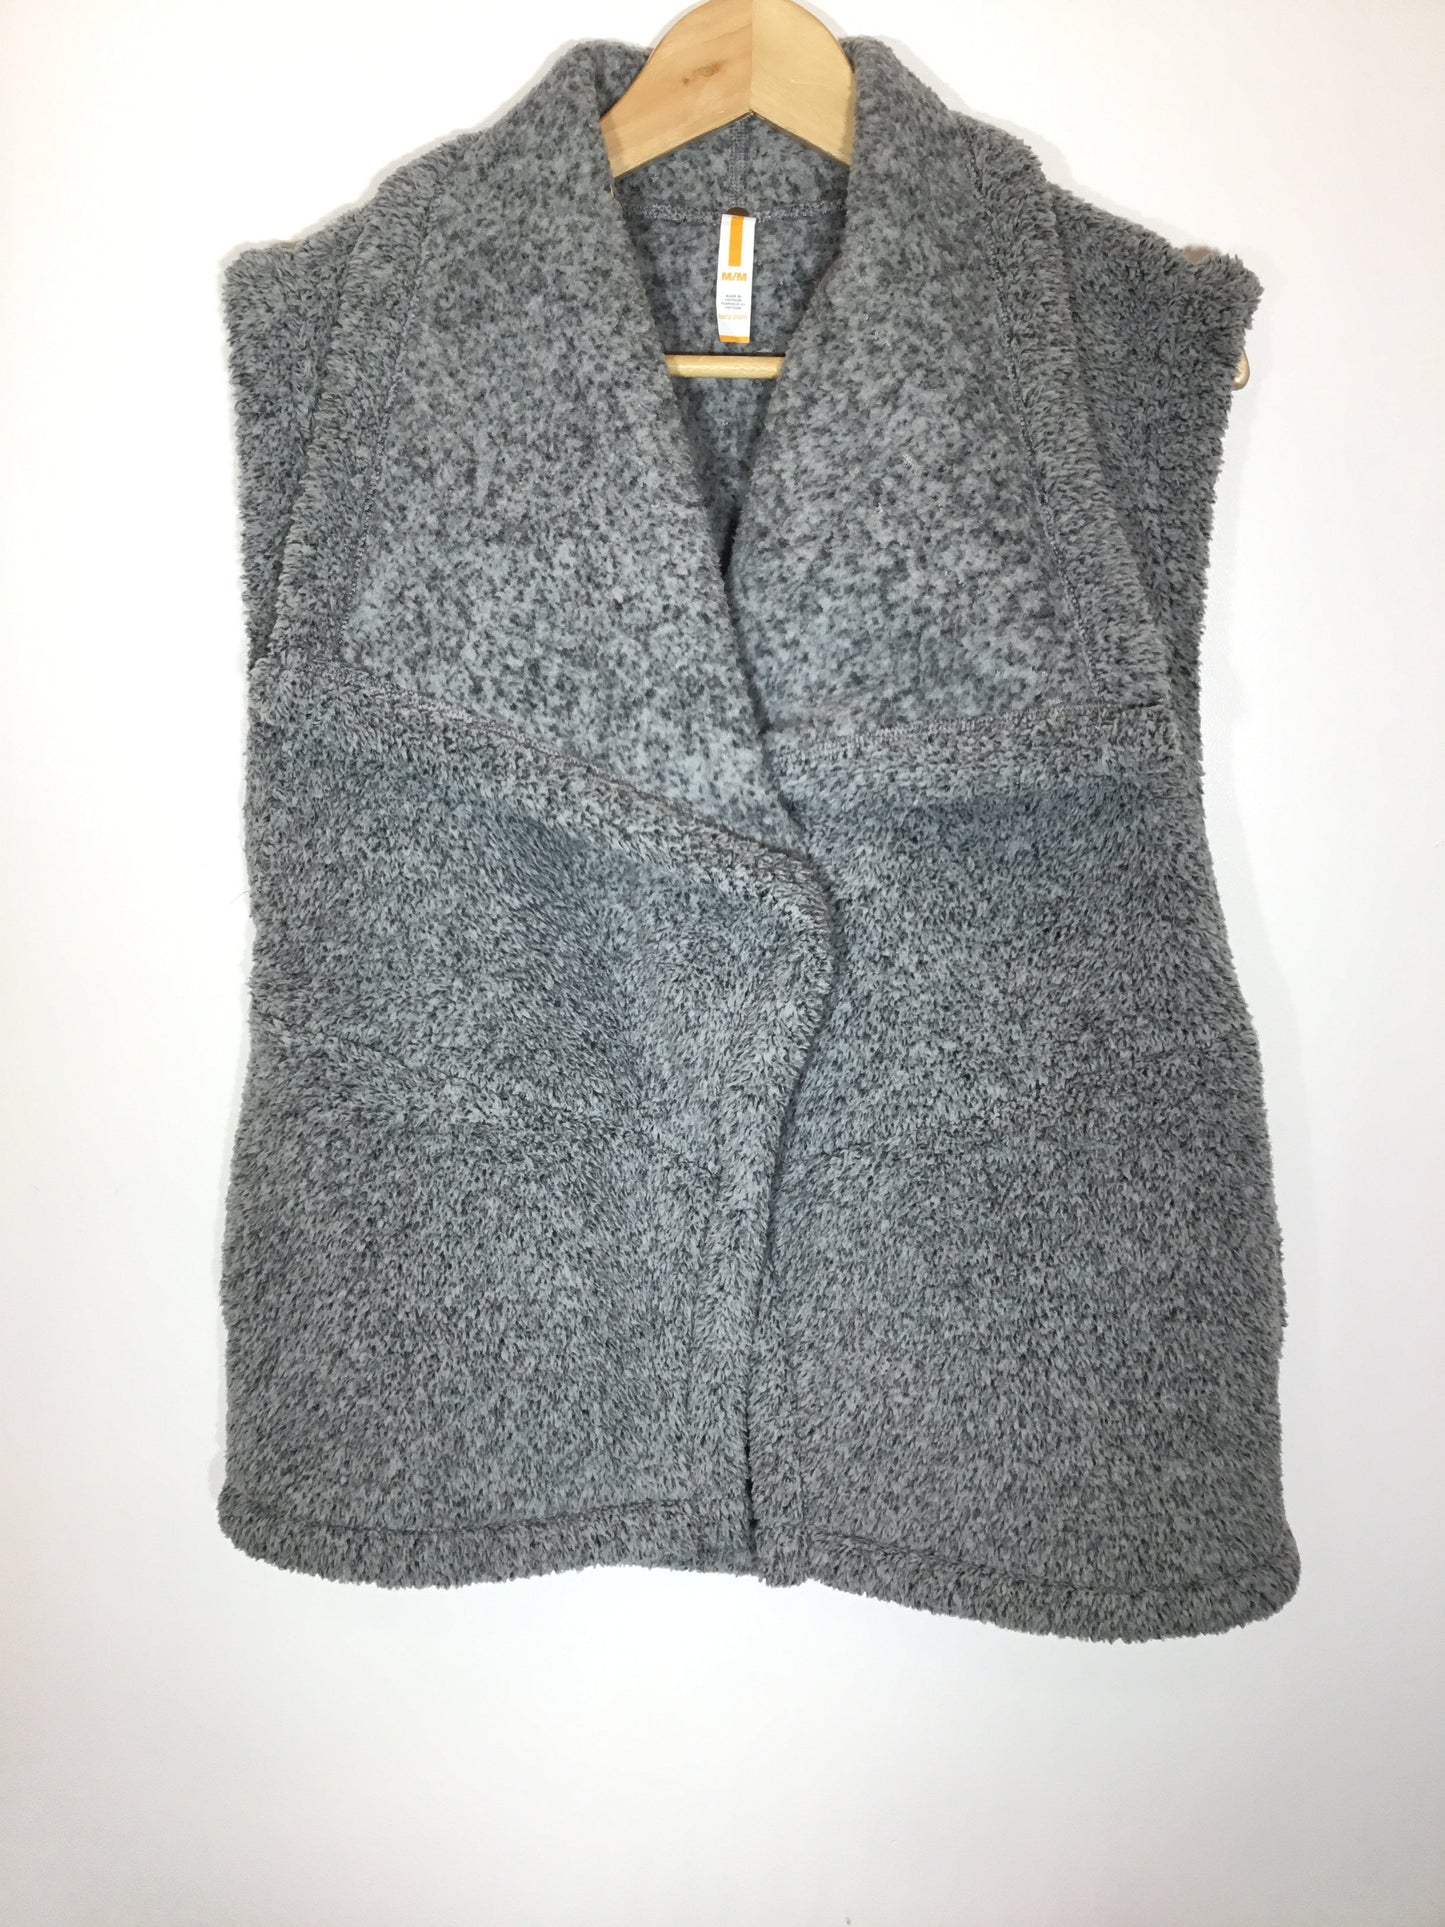 Sweater Cardigan By Lucy  Size: M